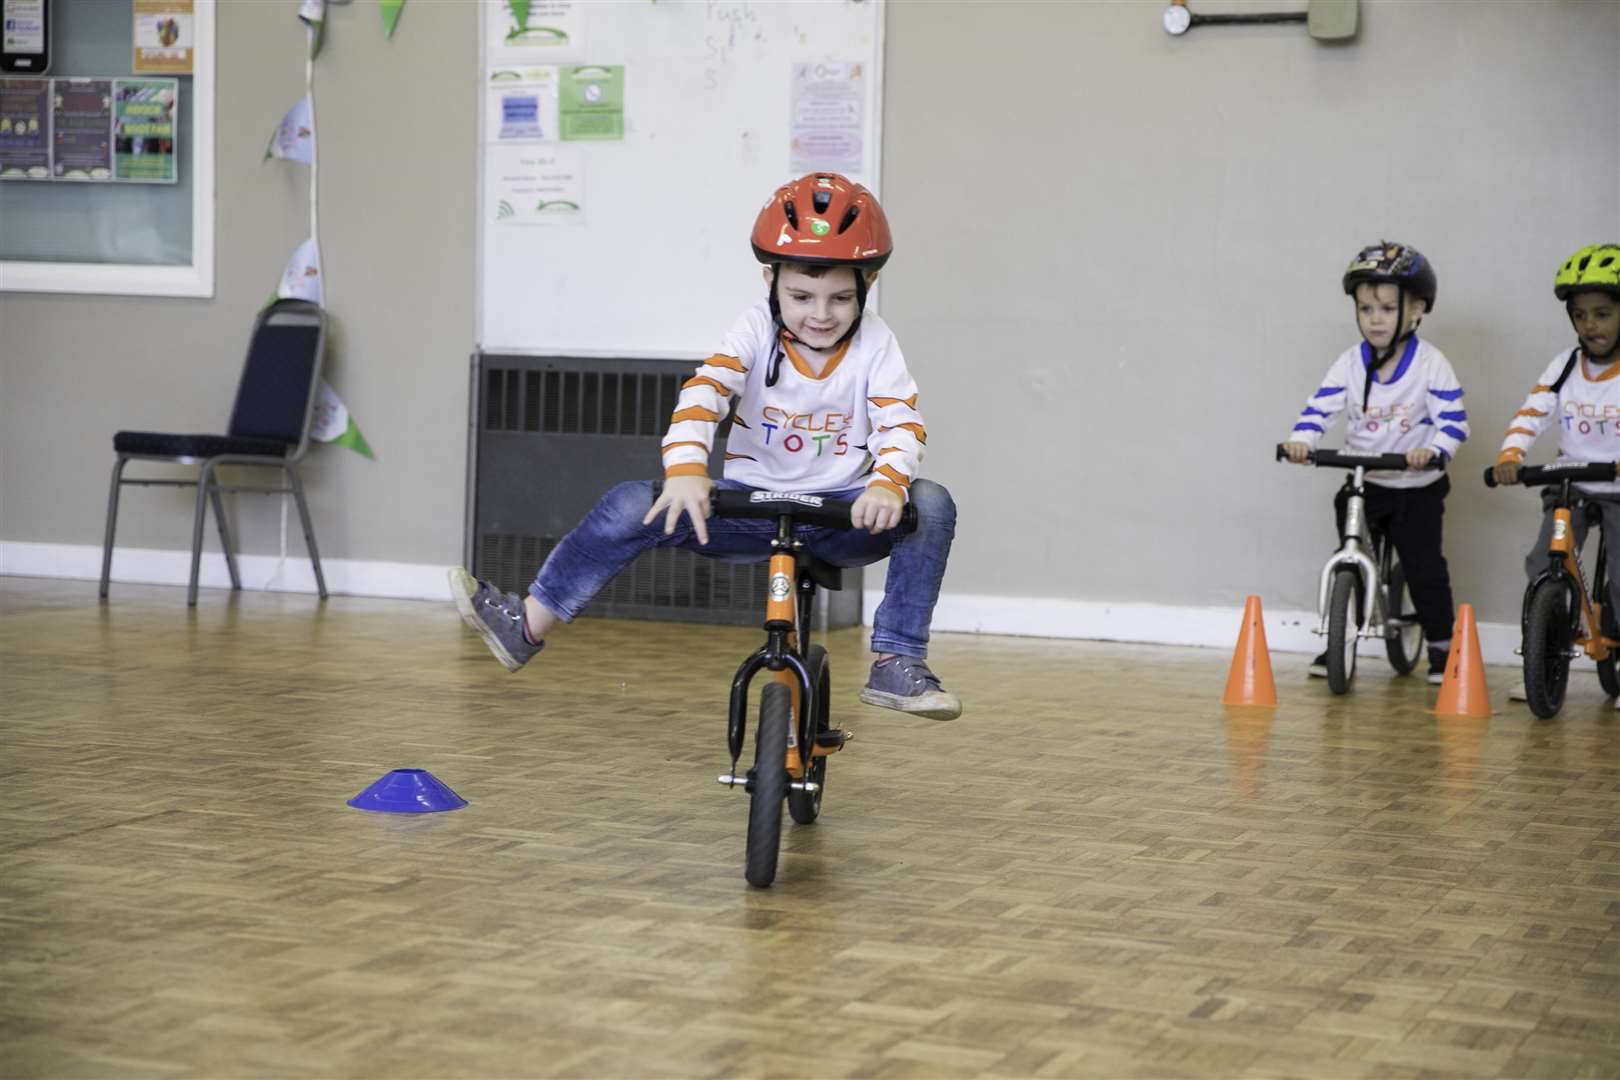 CYCLEme TOTS teamed up with Strider and children learn to ride with the help of balance bikes